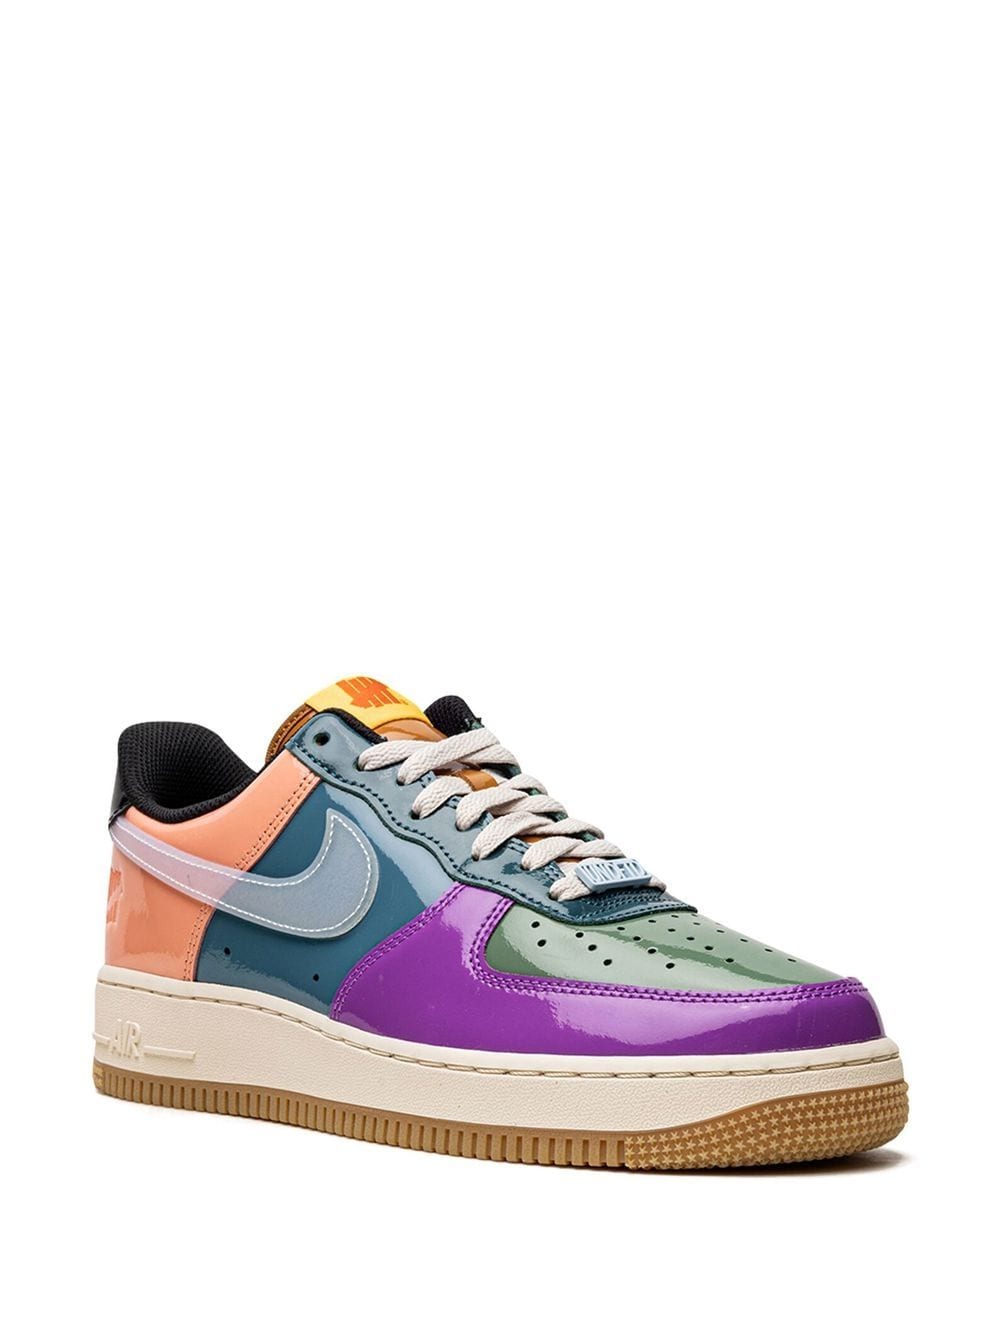 X UNDEFEATED AIR FORCE 1 LOW 运动鞋